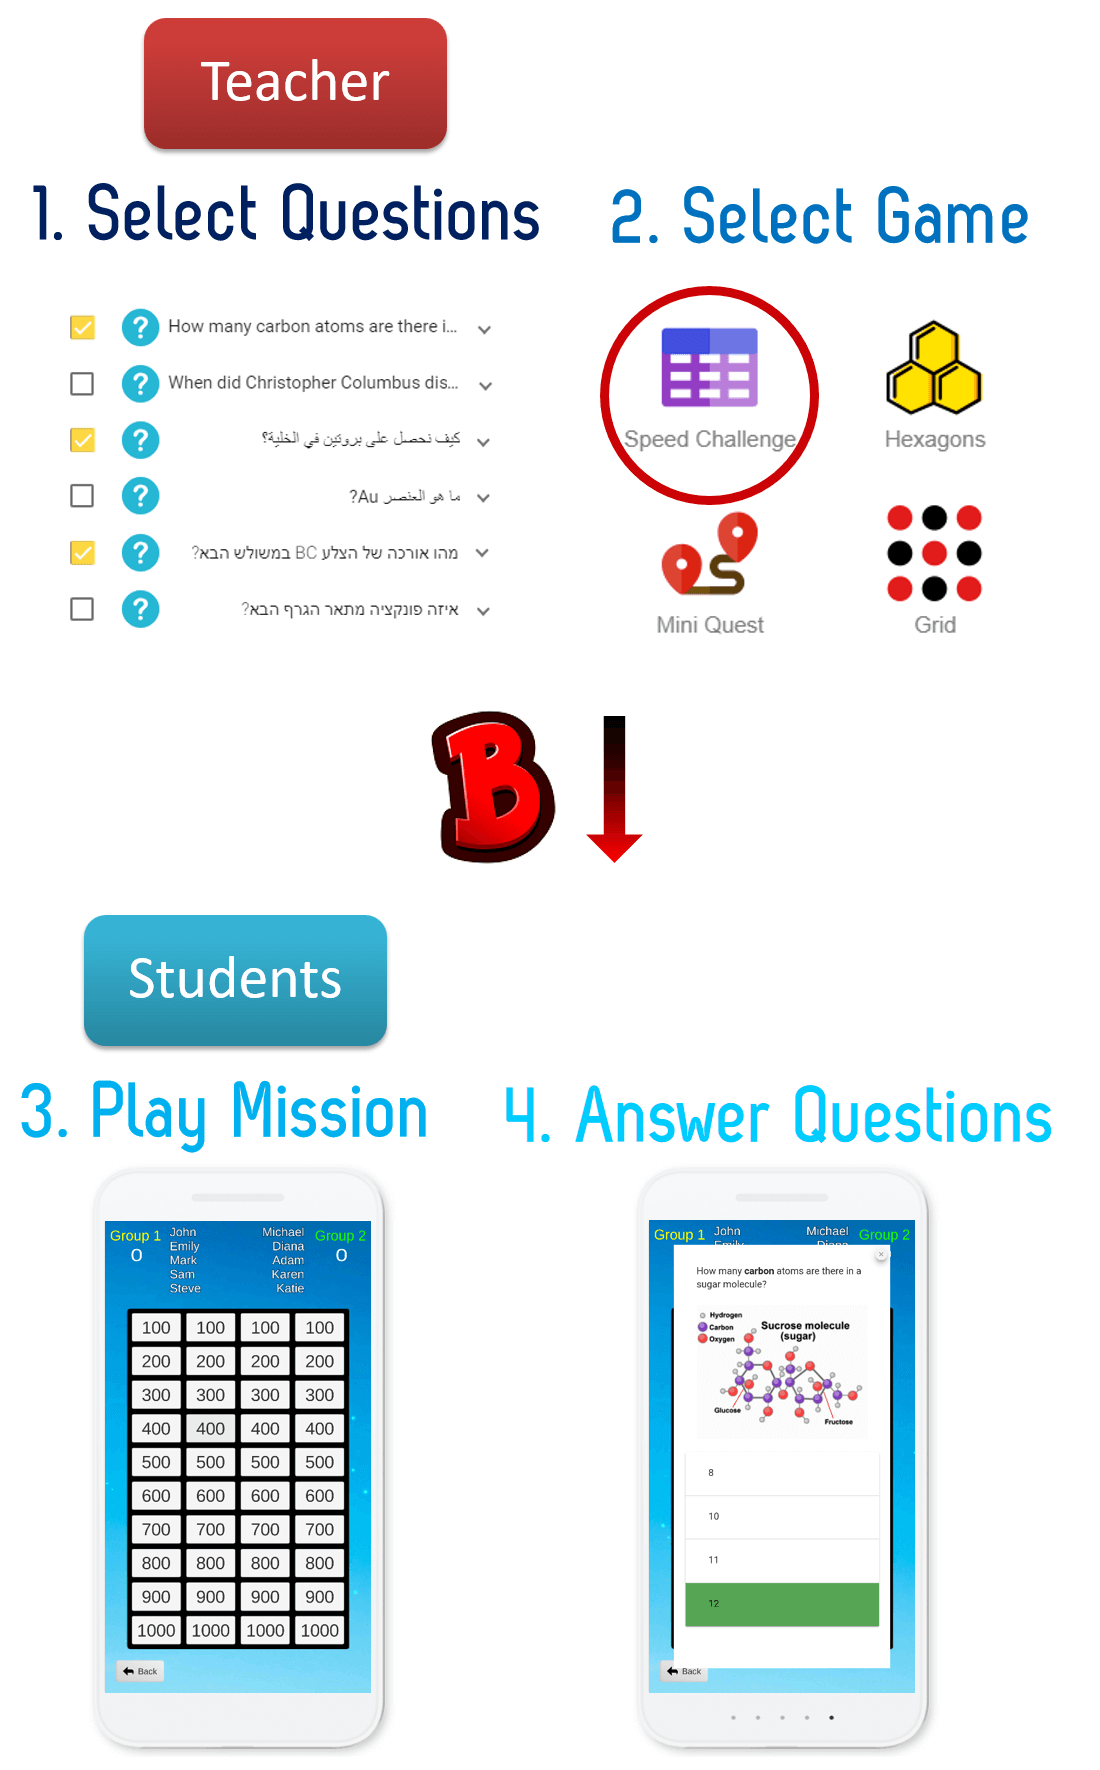 Teacher selects questions and game template, Students play the game while answering questions.